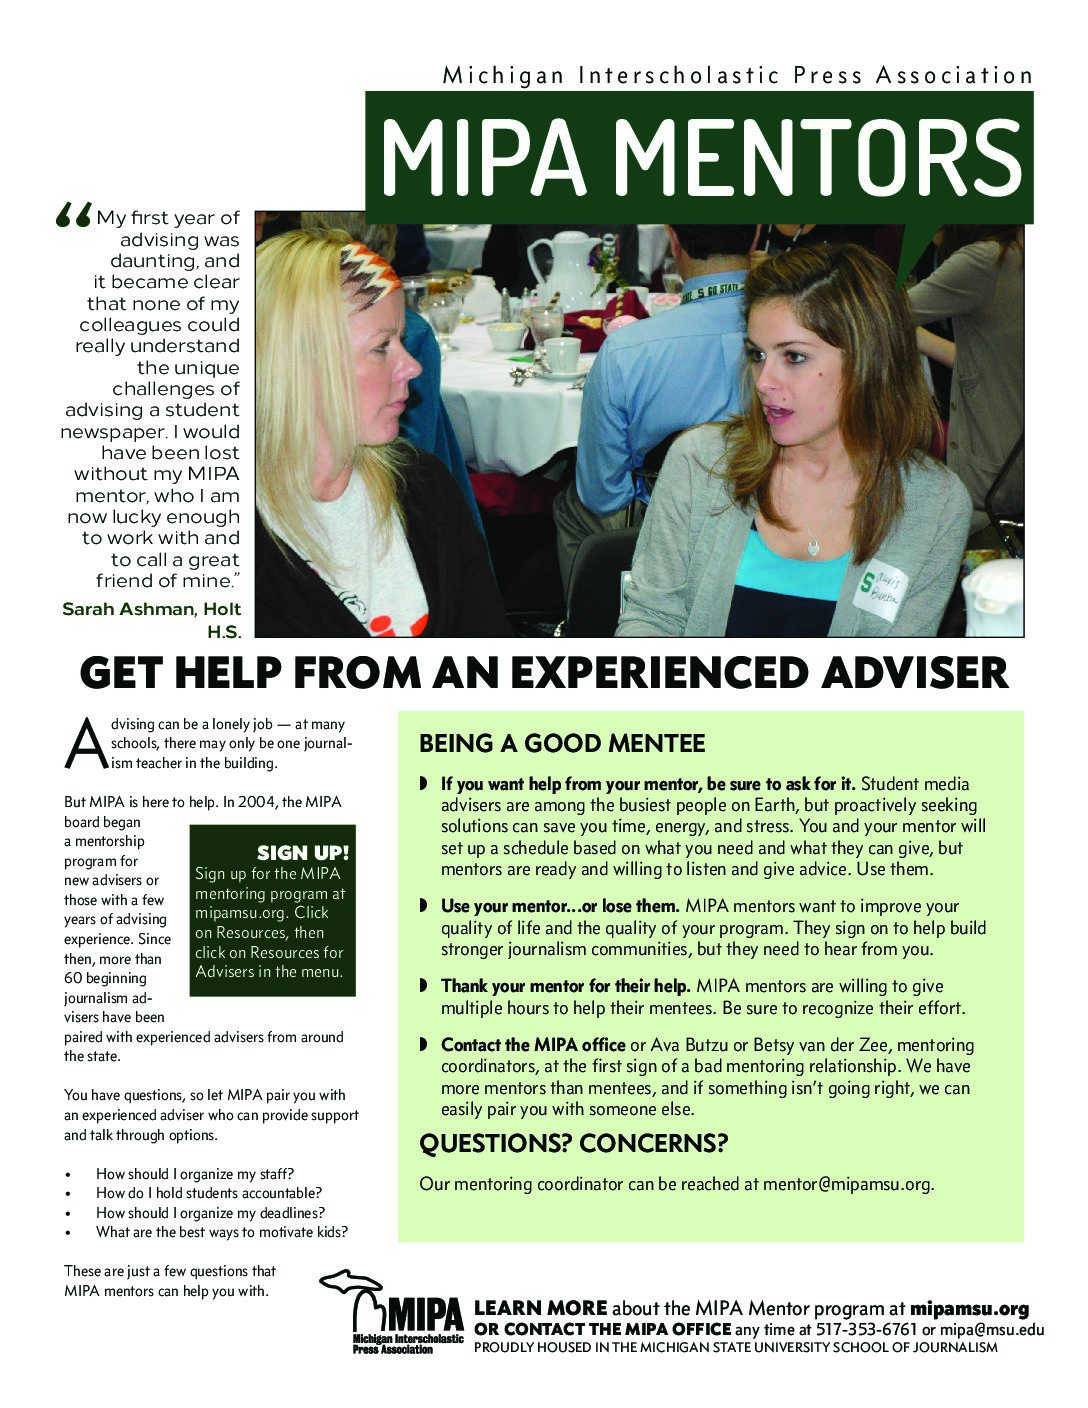 MIPA wants you to be a mentor